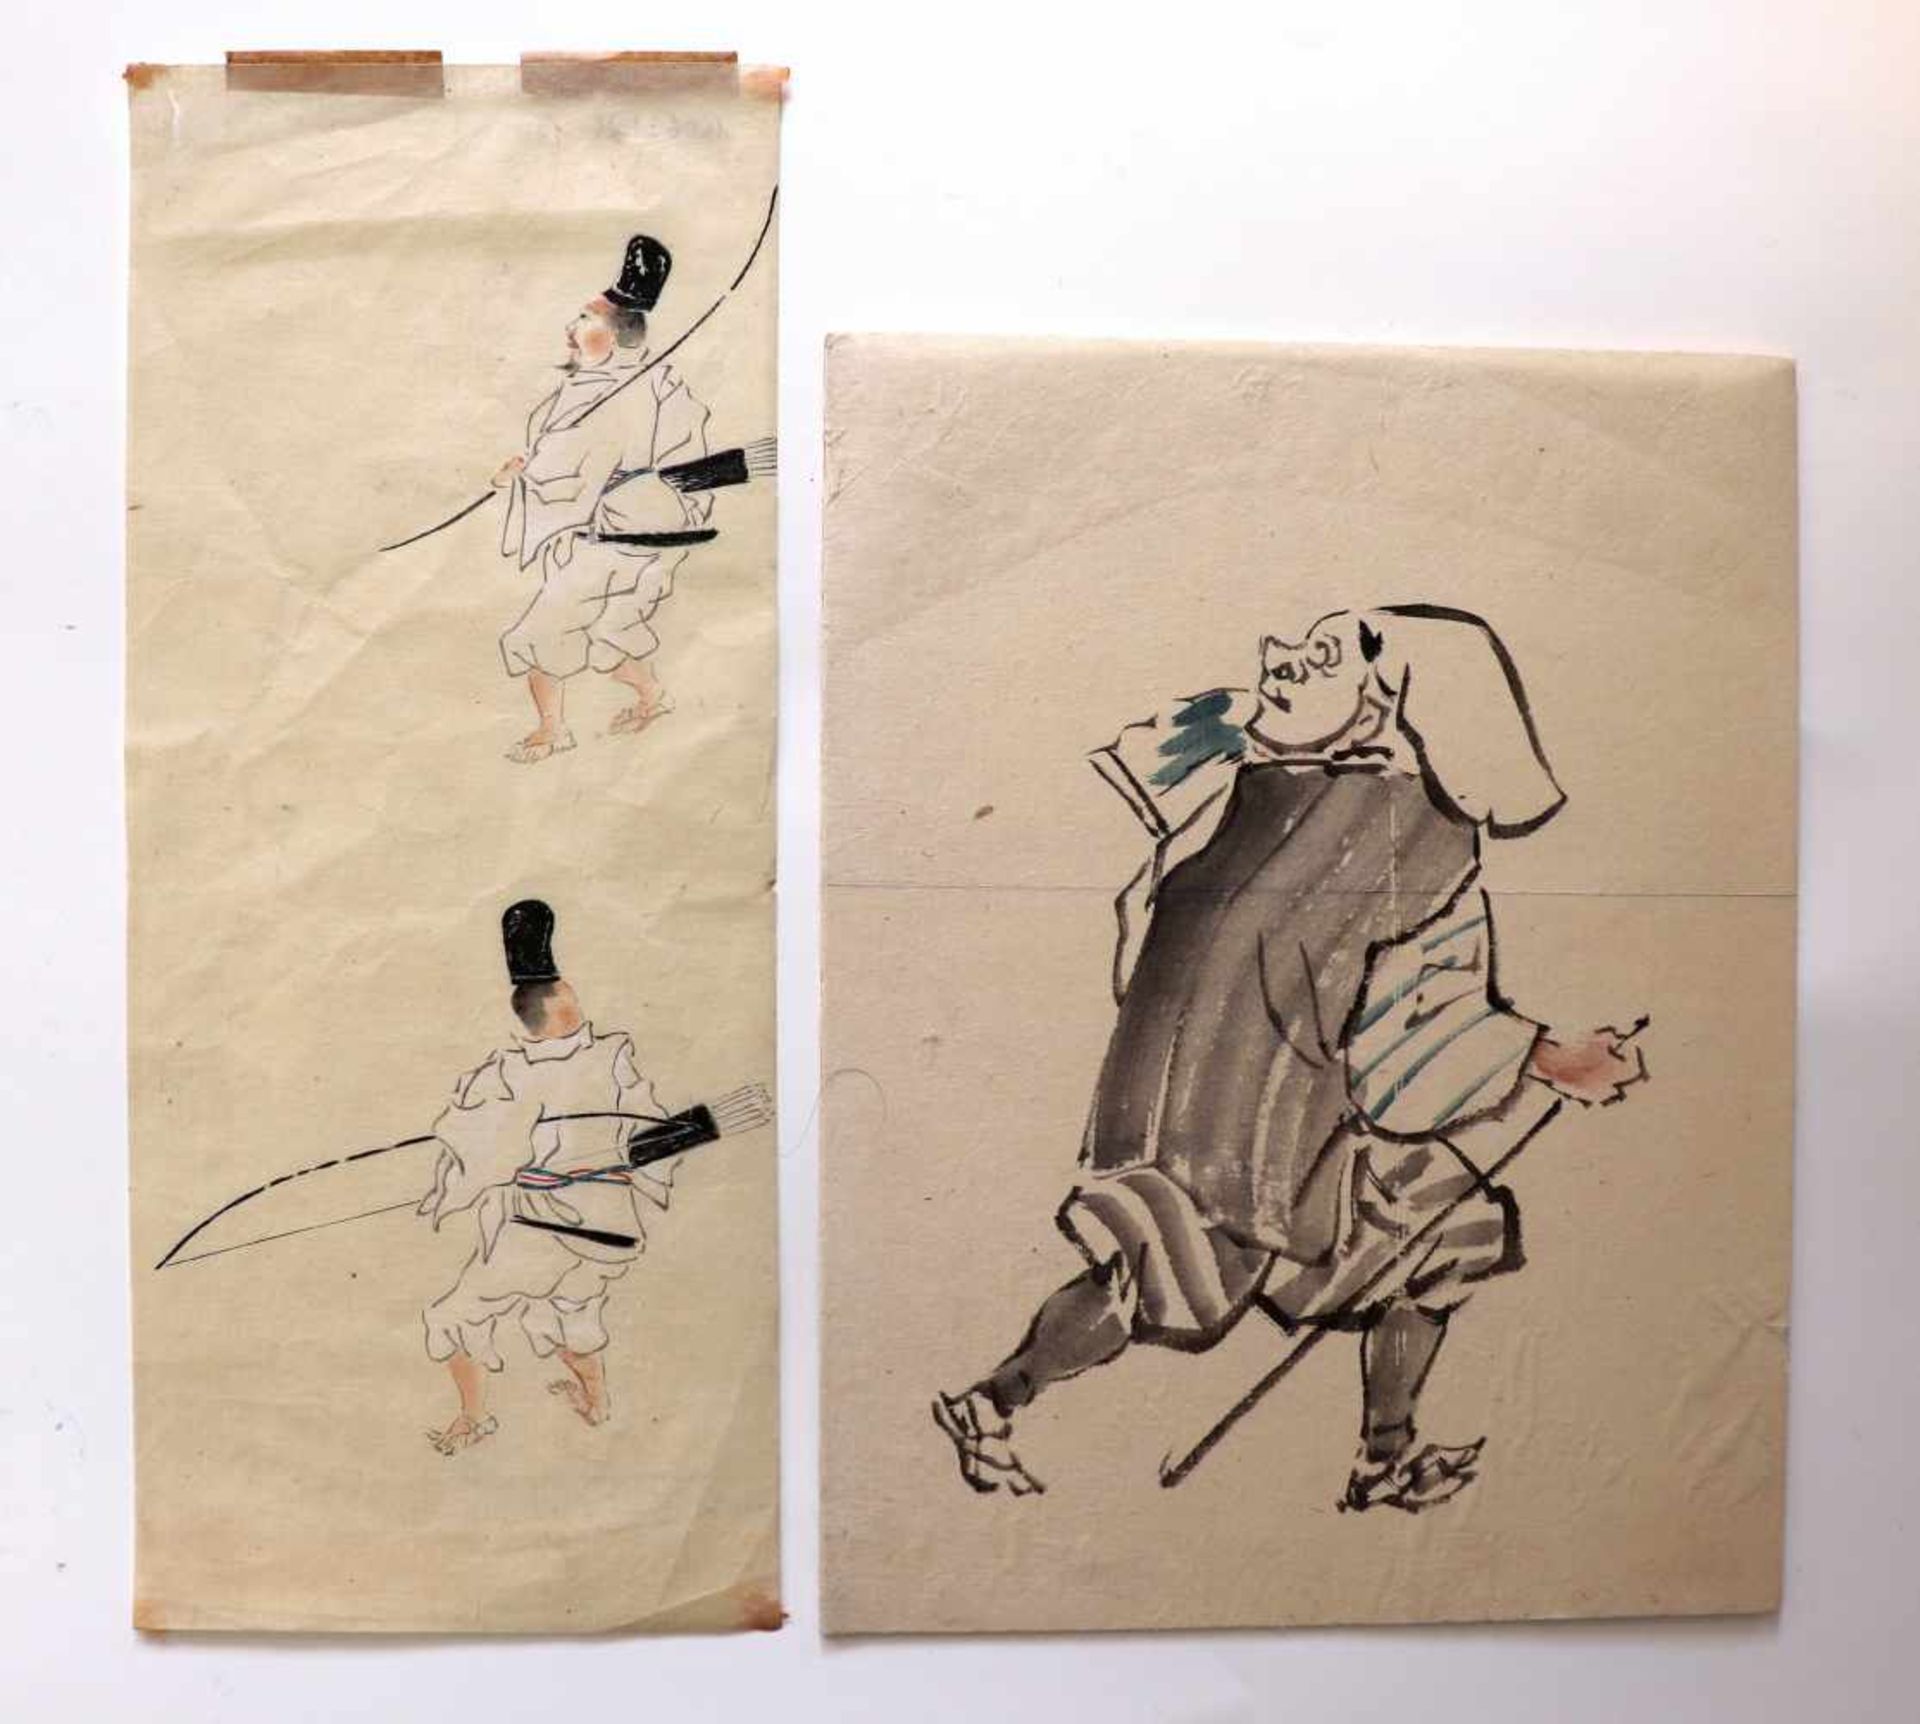 TWO SKETCHES FROM THE JAPANESE SCHOOLInk and watercolor on paperJapan, 19th centuryDimensions: